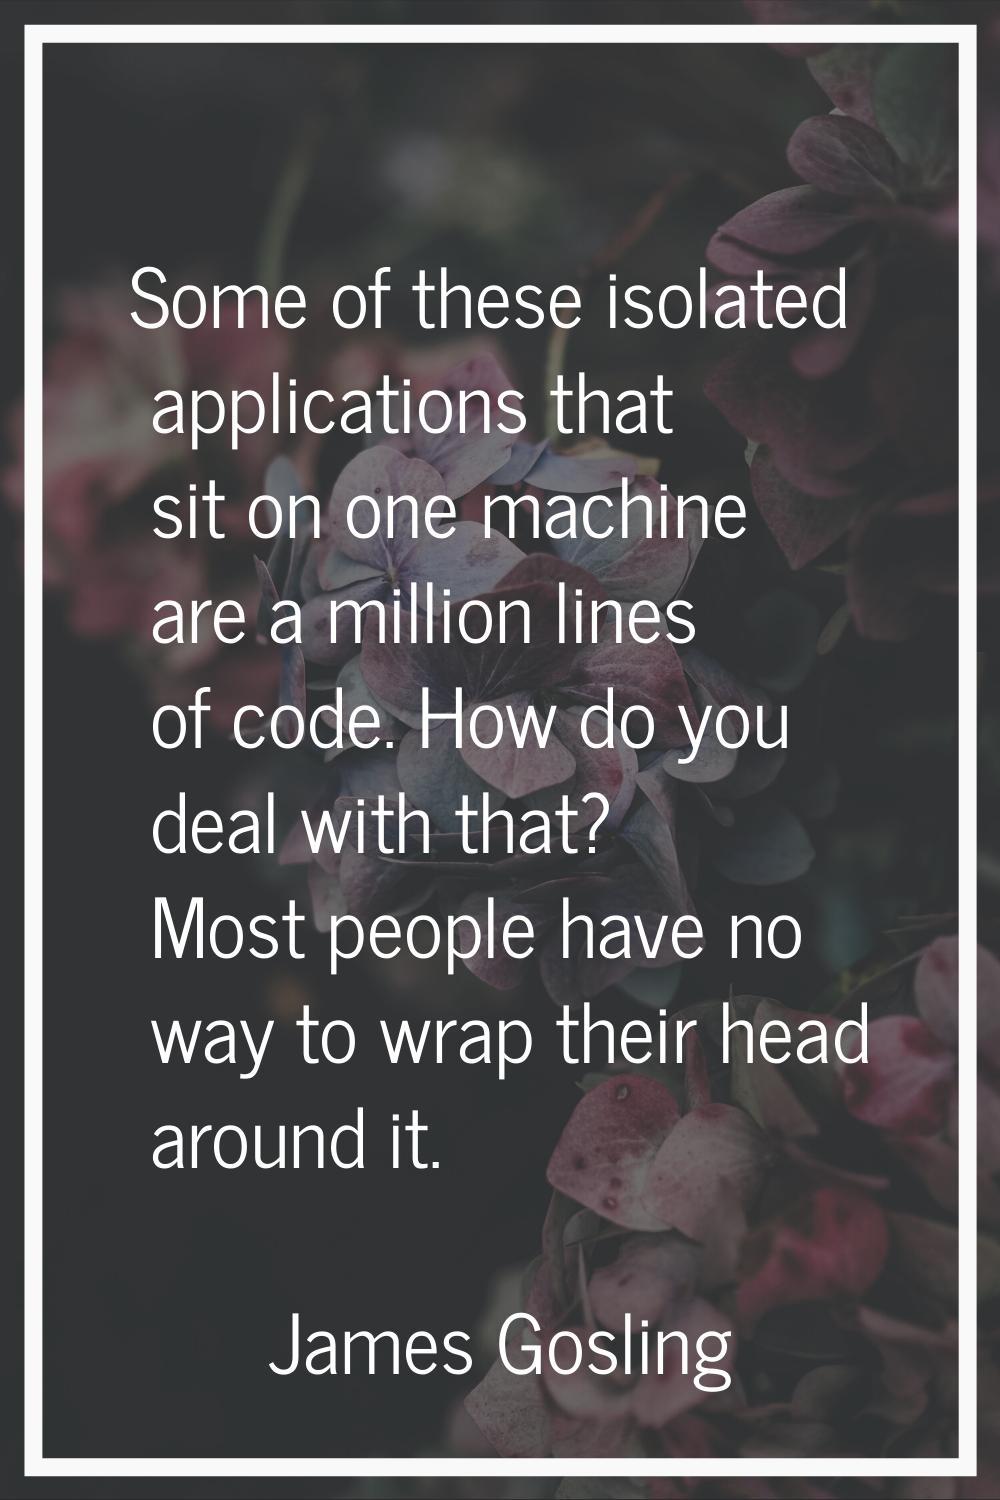 Some of these isolated applications that sit on one machine are a million lines of code. How do you